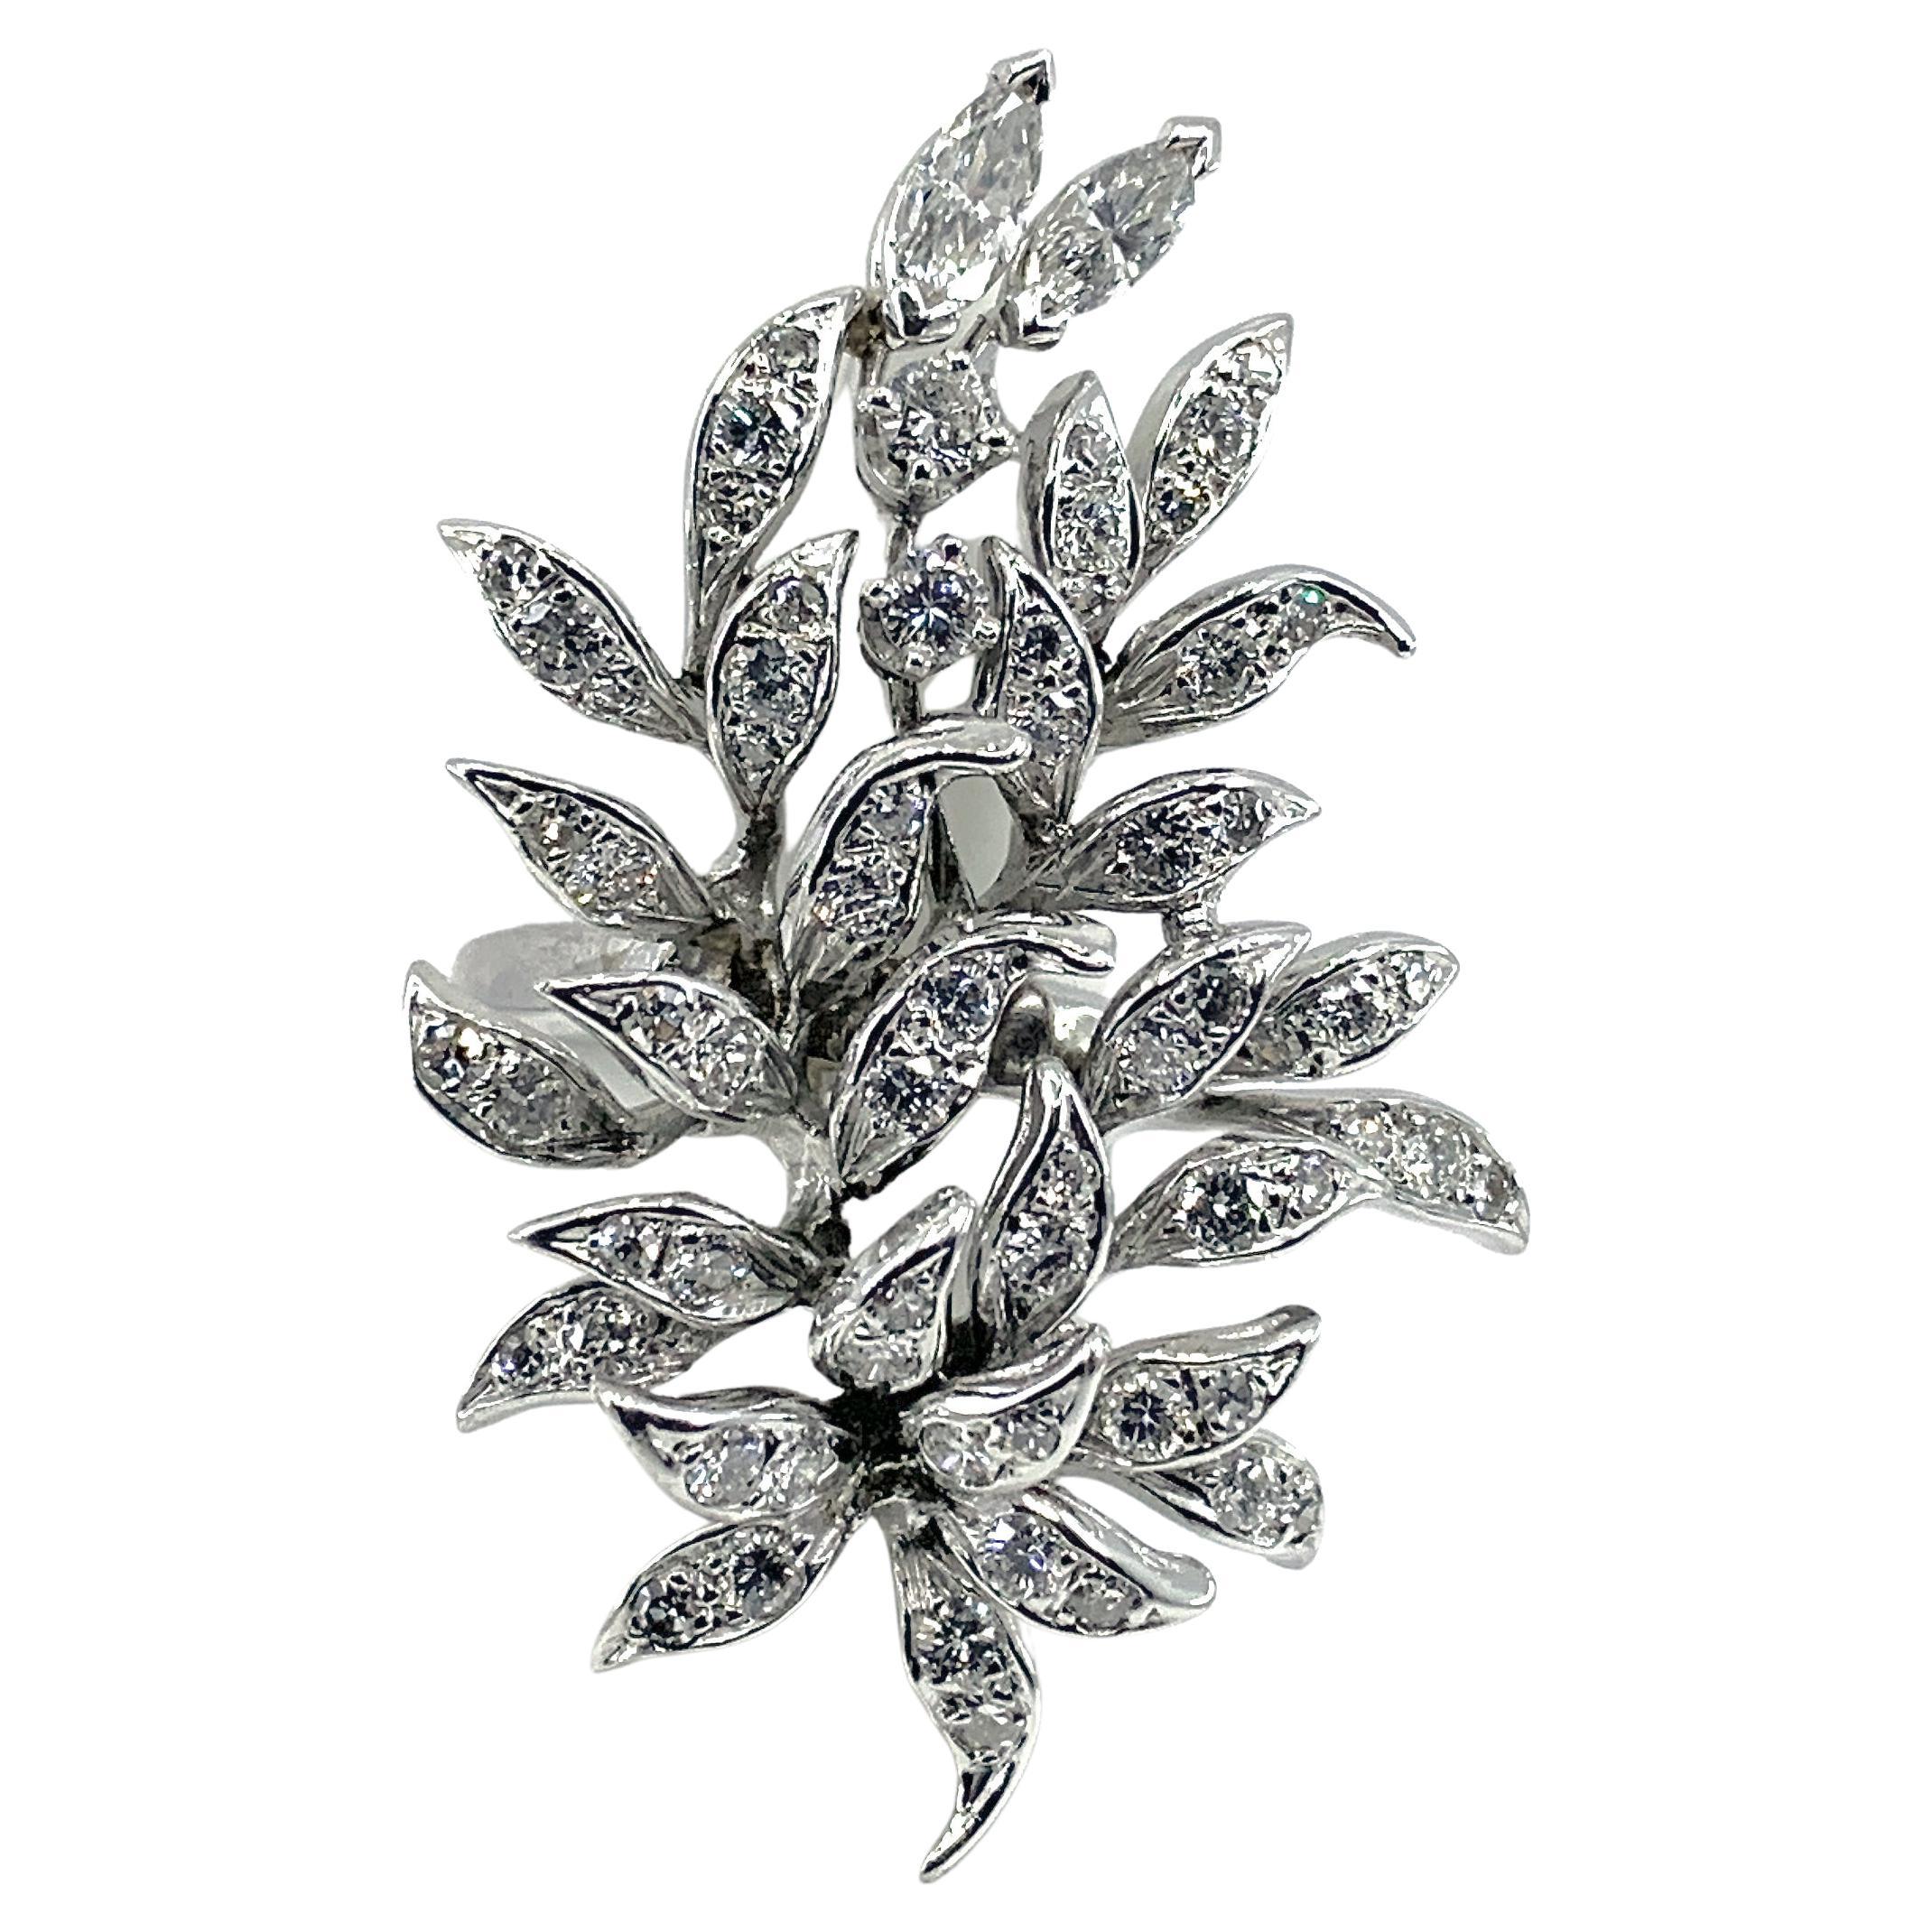 This fantastic ring started out in life as a diamond brooch, but Eytan thought it would be more interesting as a ring, so he attached it to a white gold band and -- voila! -- a festive and delightfully sexy sprawl of leafy sparkle for your